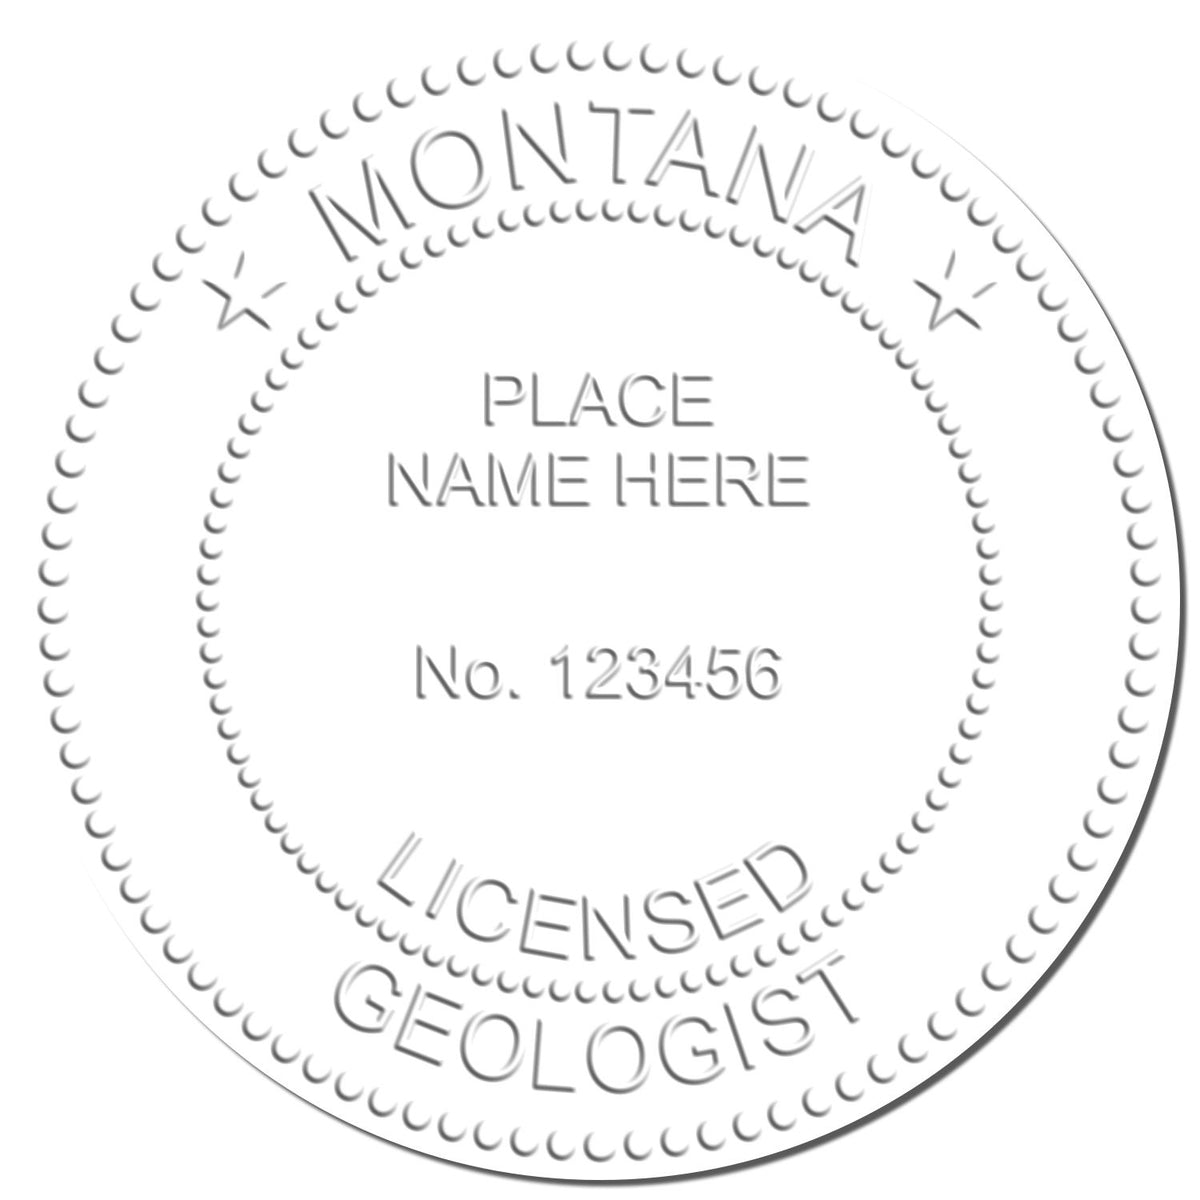 A photograph of the State of Montana Extended Long Reach Geologist Seal stamp impression reveals a vivid, professional image of the on paper.